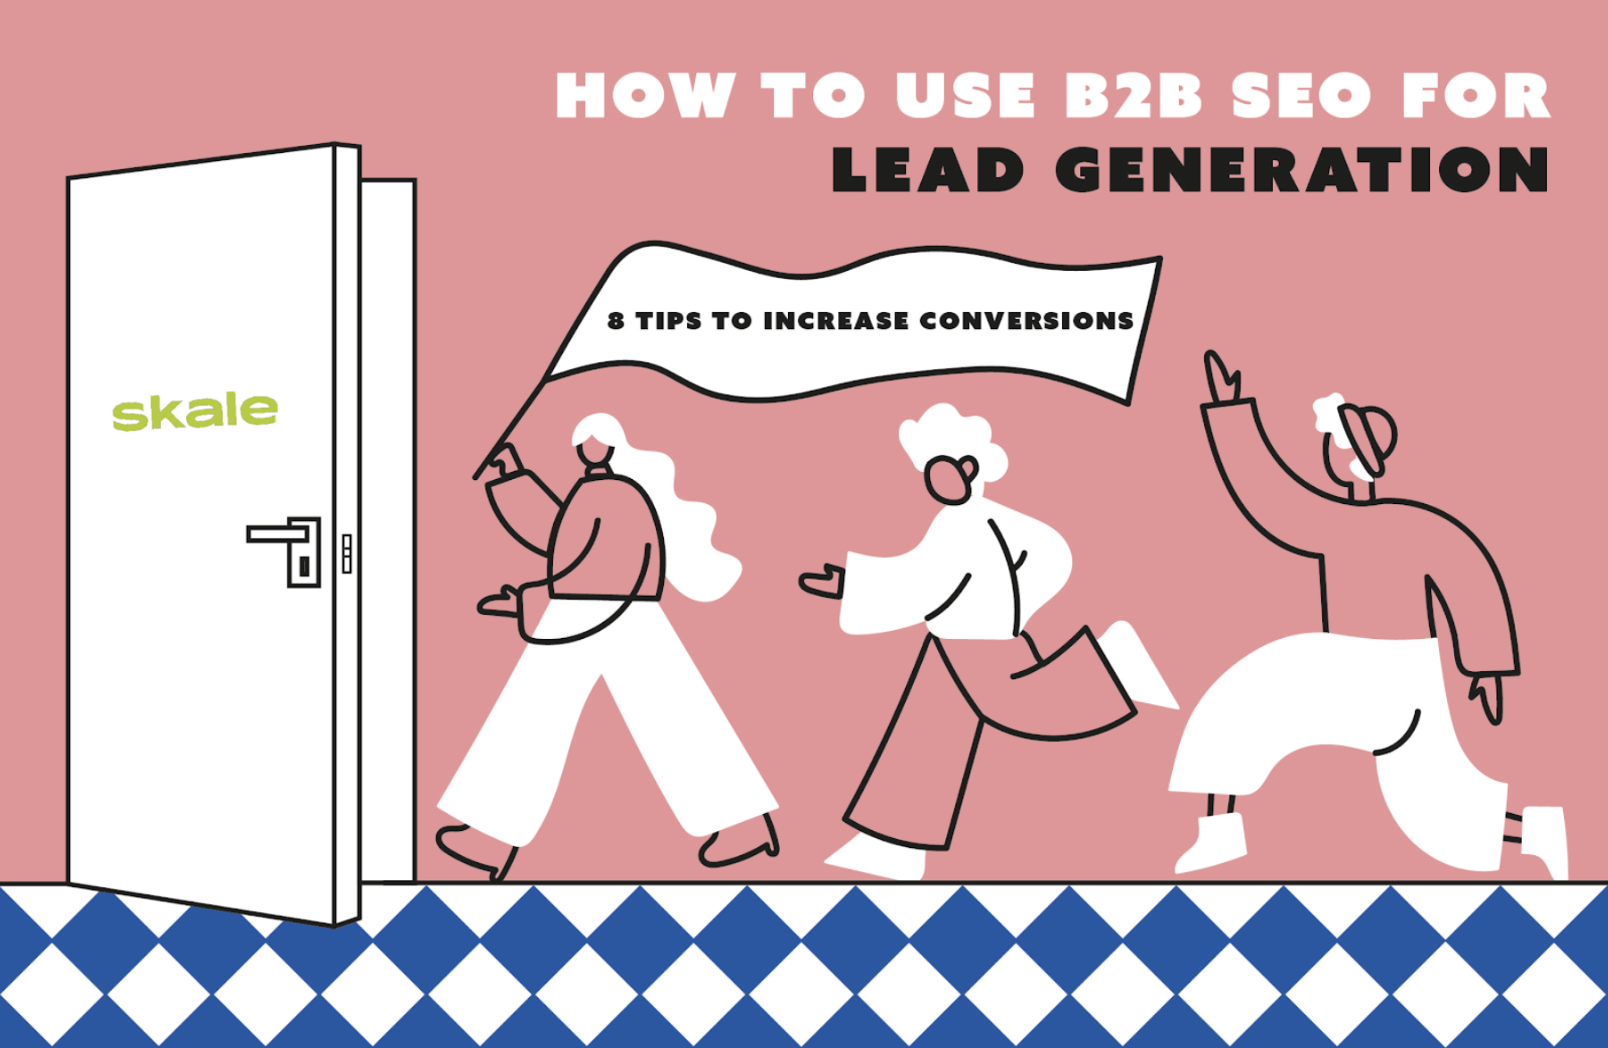 How to Use B2B SEO for Lead Generation (8 Tips to Increase Conversions)